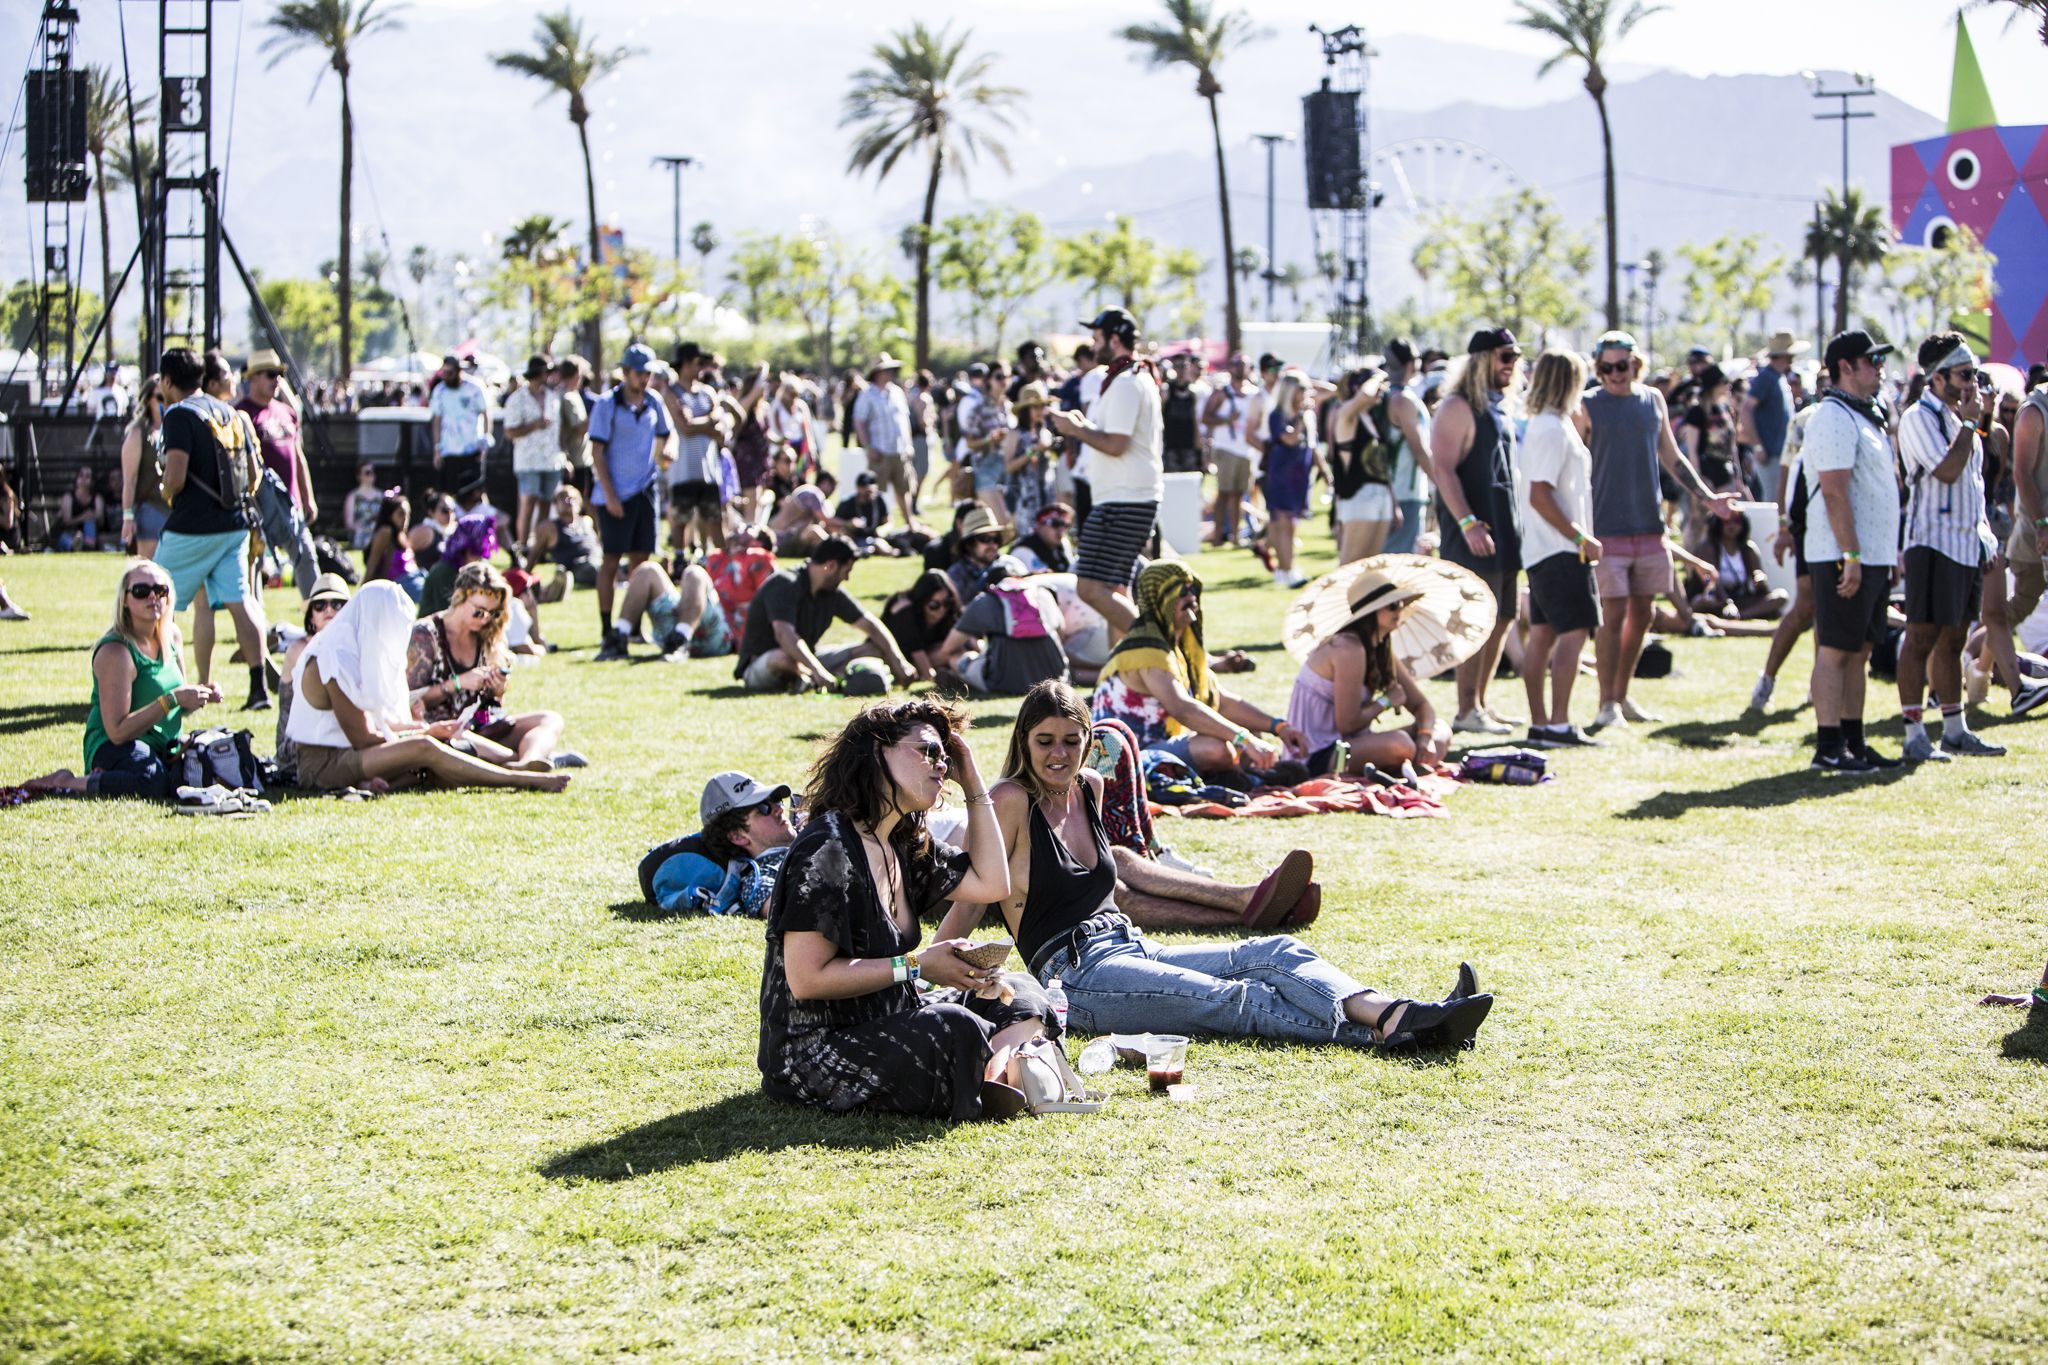 coachella 2017 1 4 Coachella 2017 Festival Review: From Worst to Best